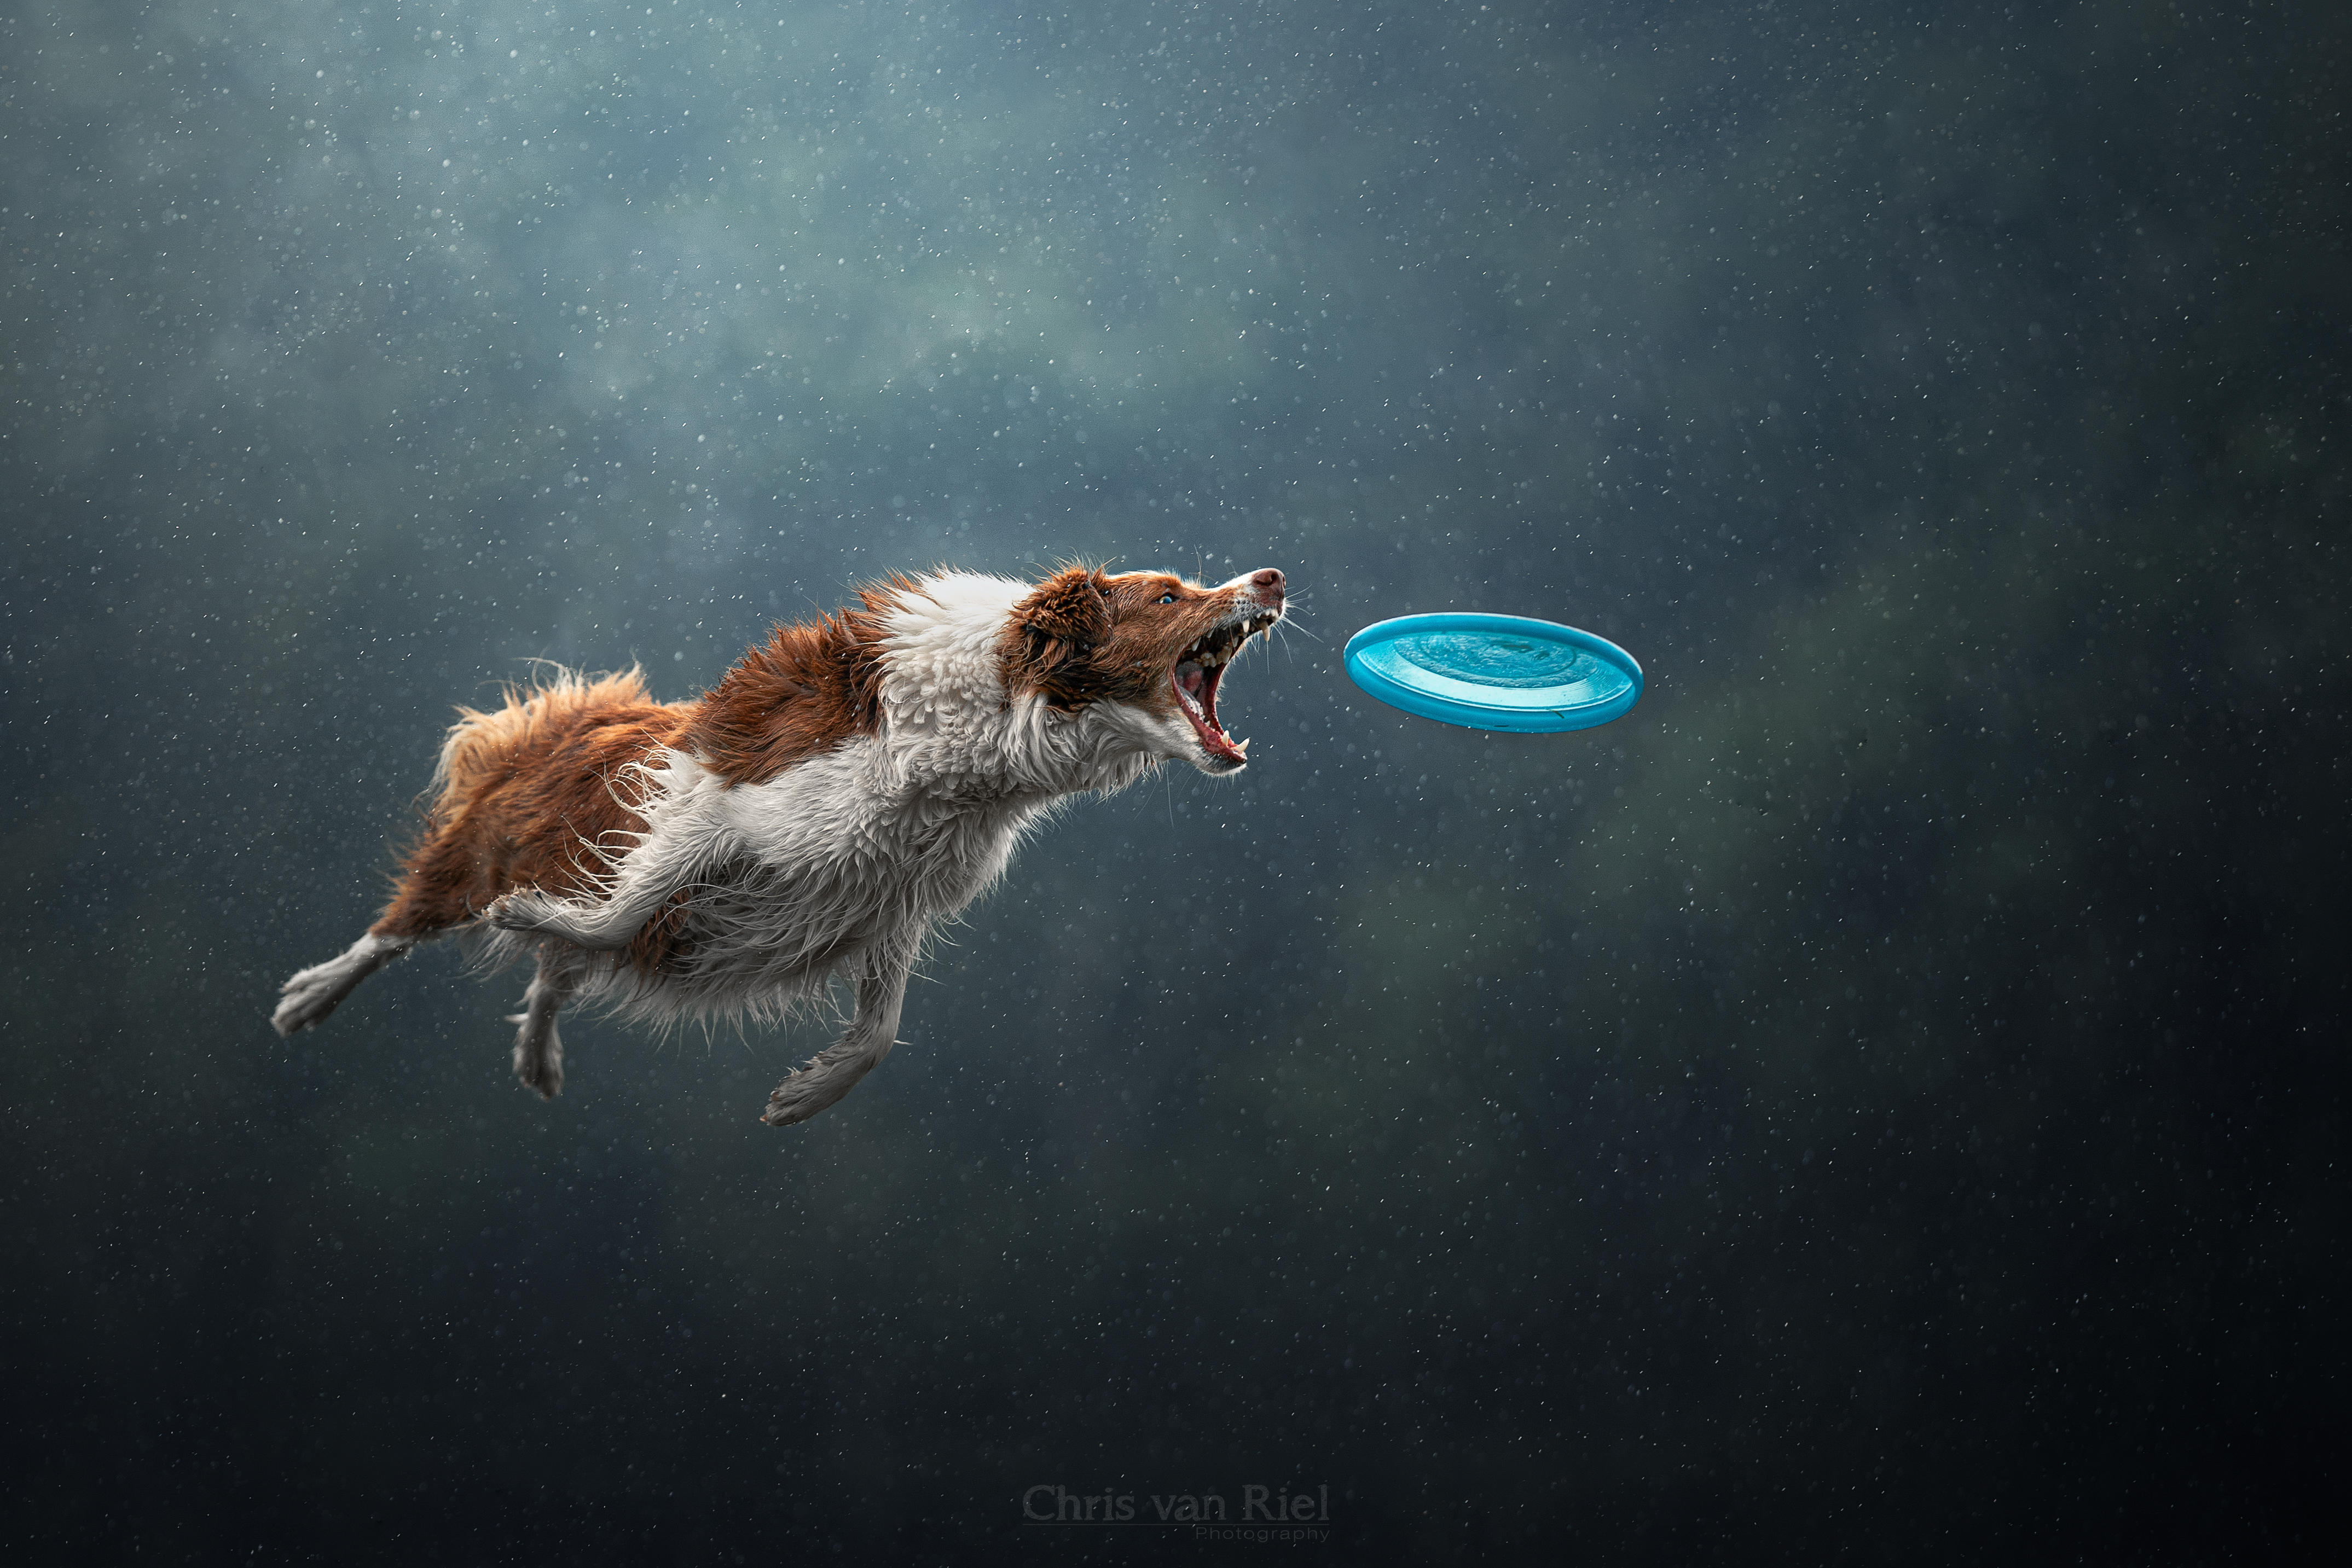 How Chris Van Riel Makes His Amazing Photos of Flying Dogs